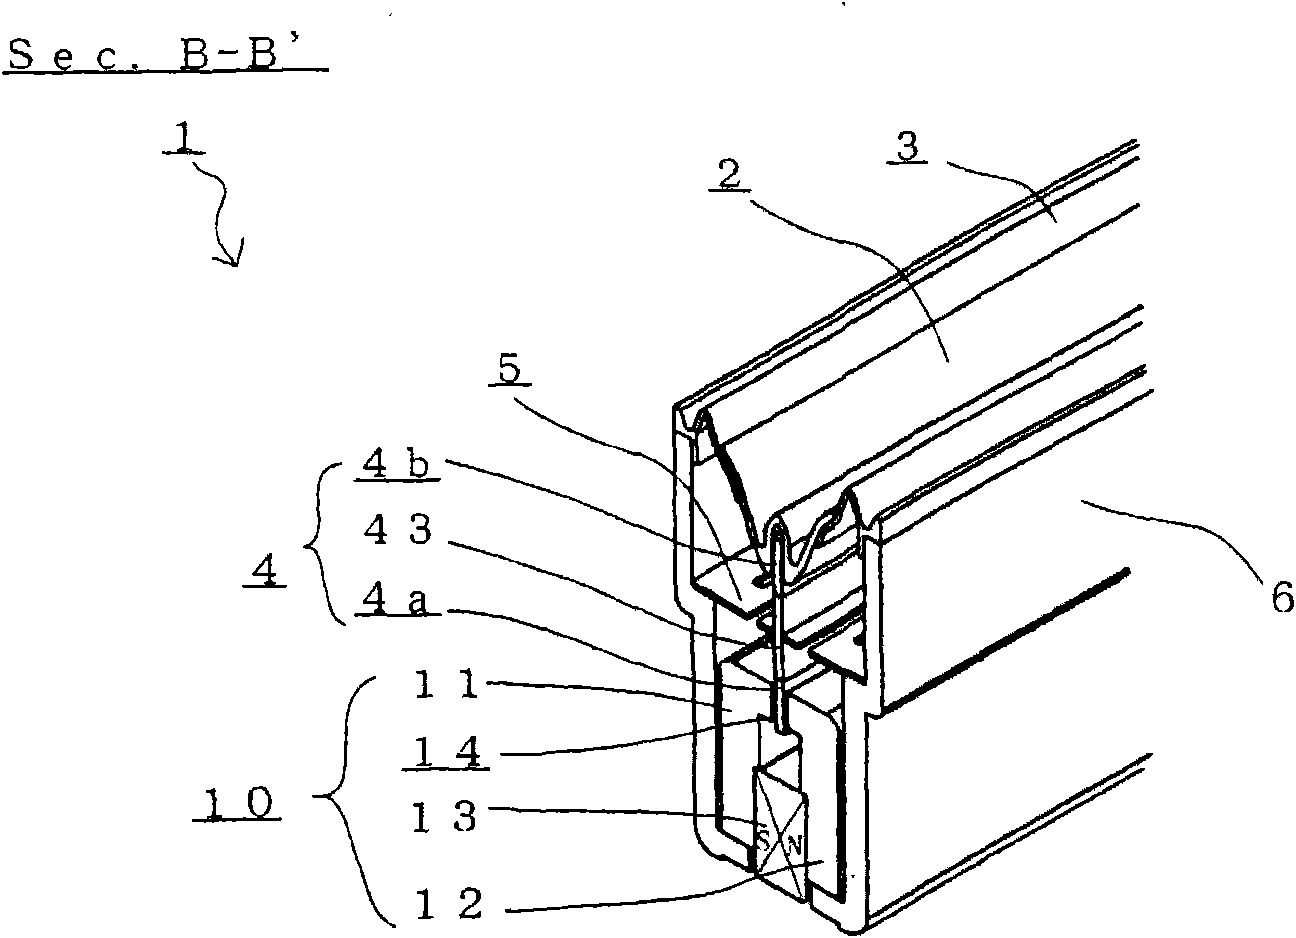 Voice coil and electrodynamic speaker using same